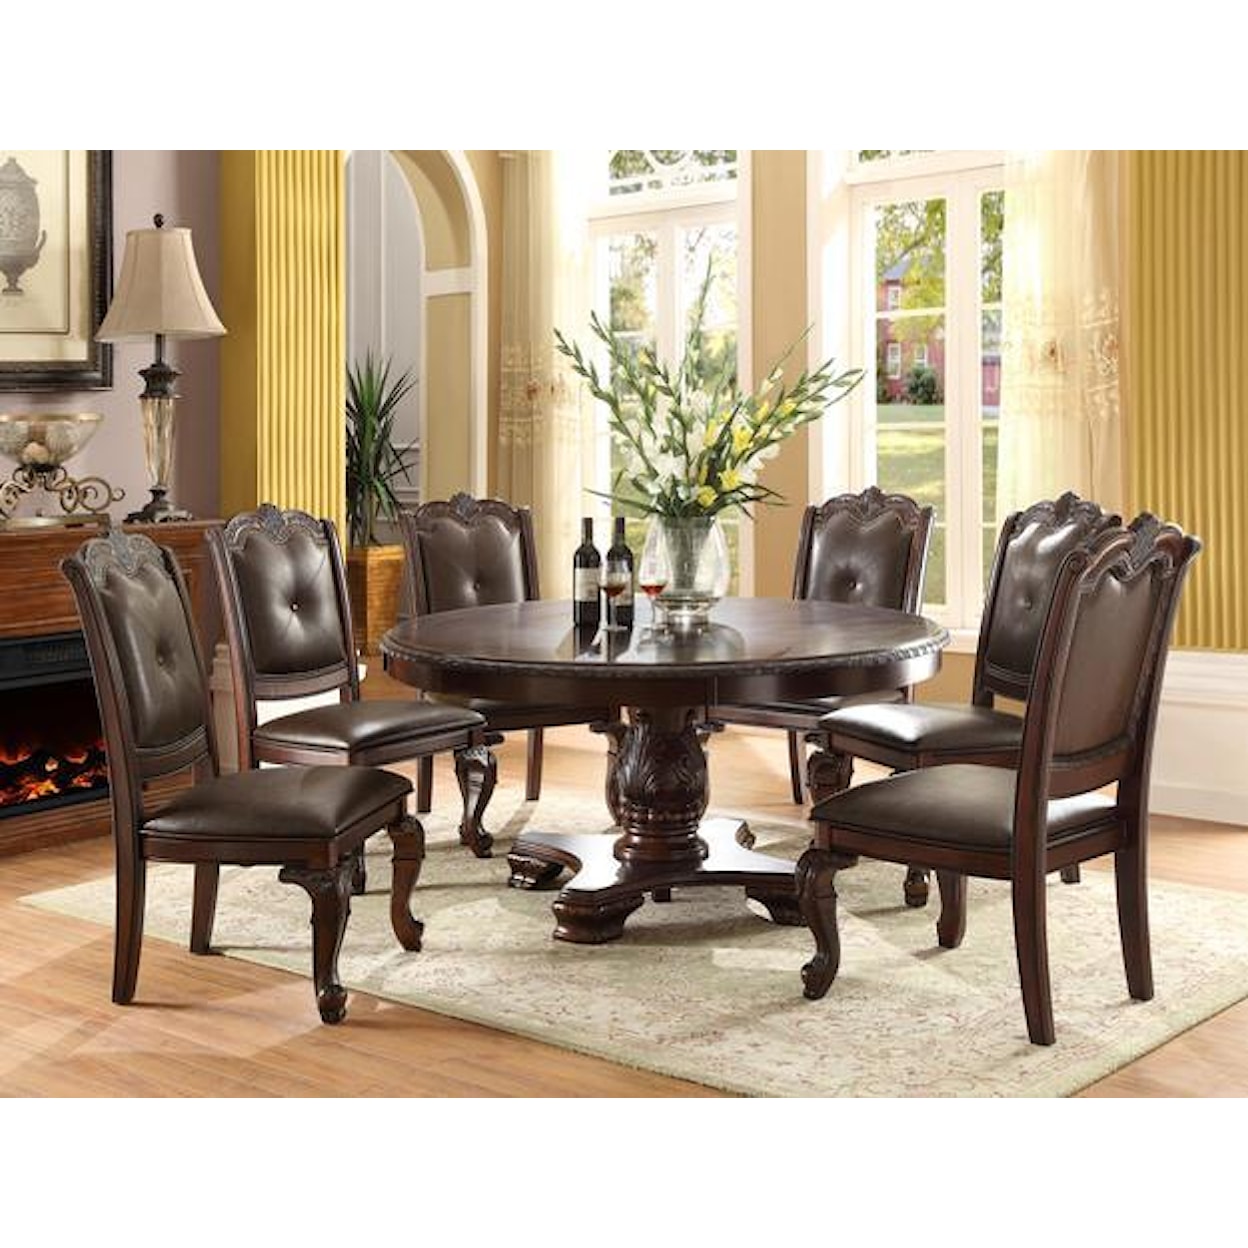 Crown Mark Kiera Round Table with Four Chairs